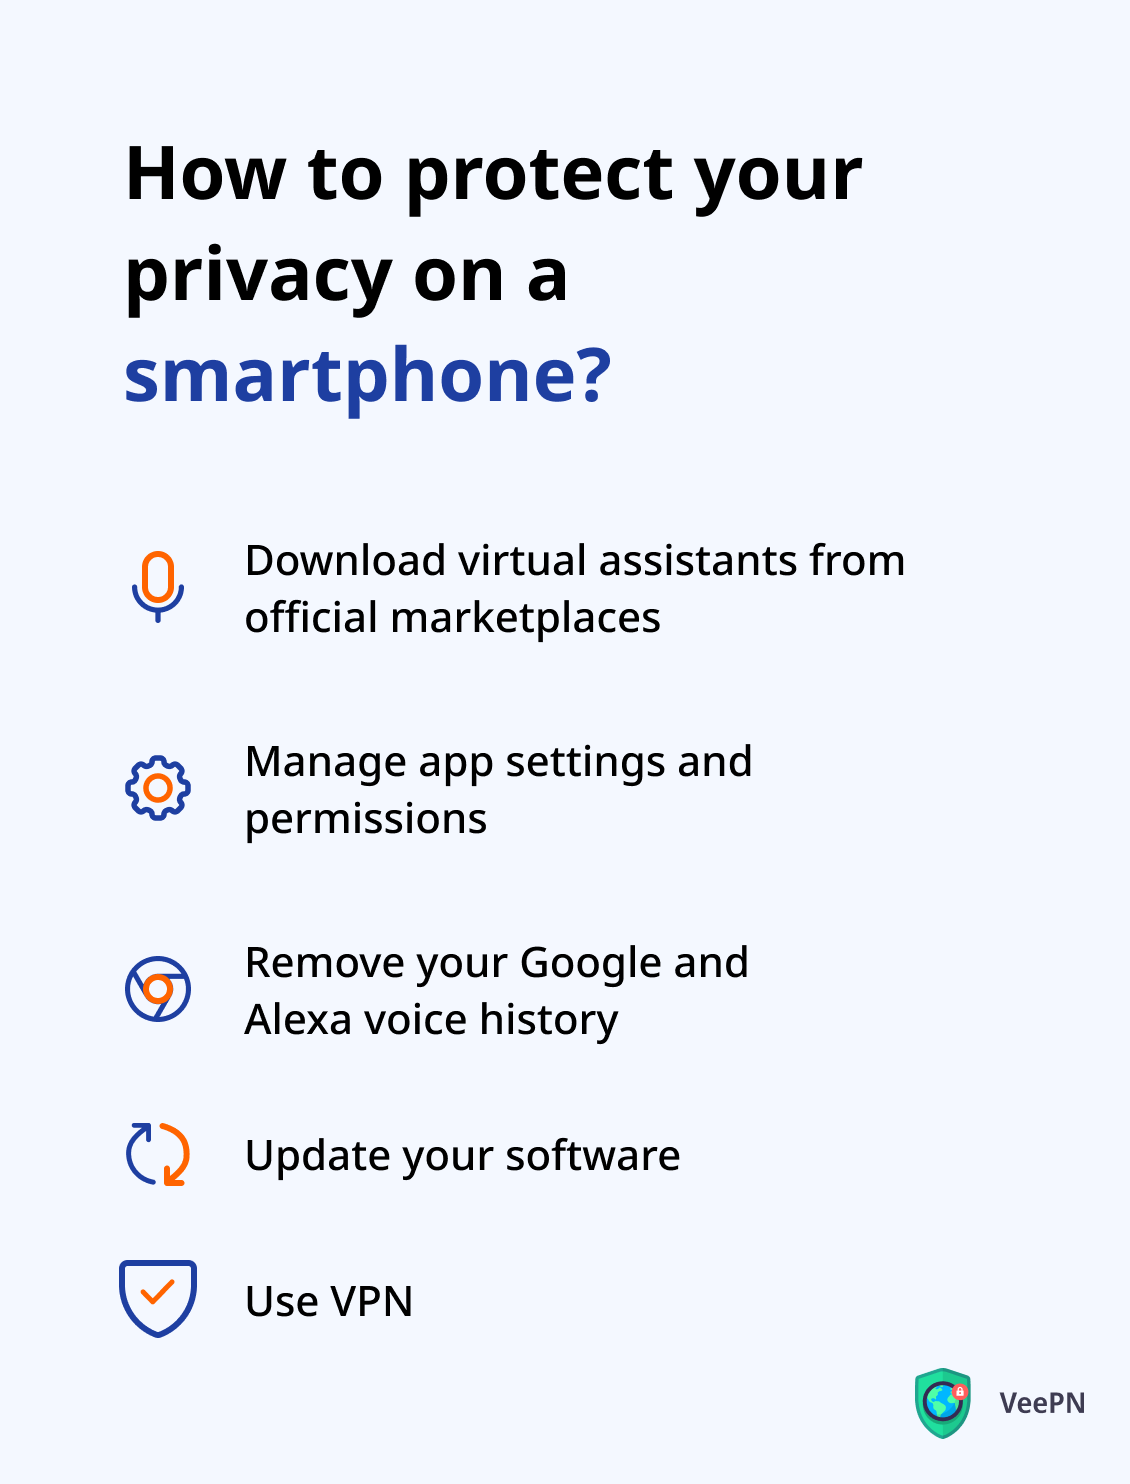 How to protect your privacy on a smartphone